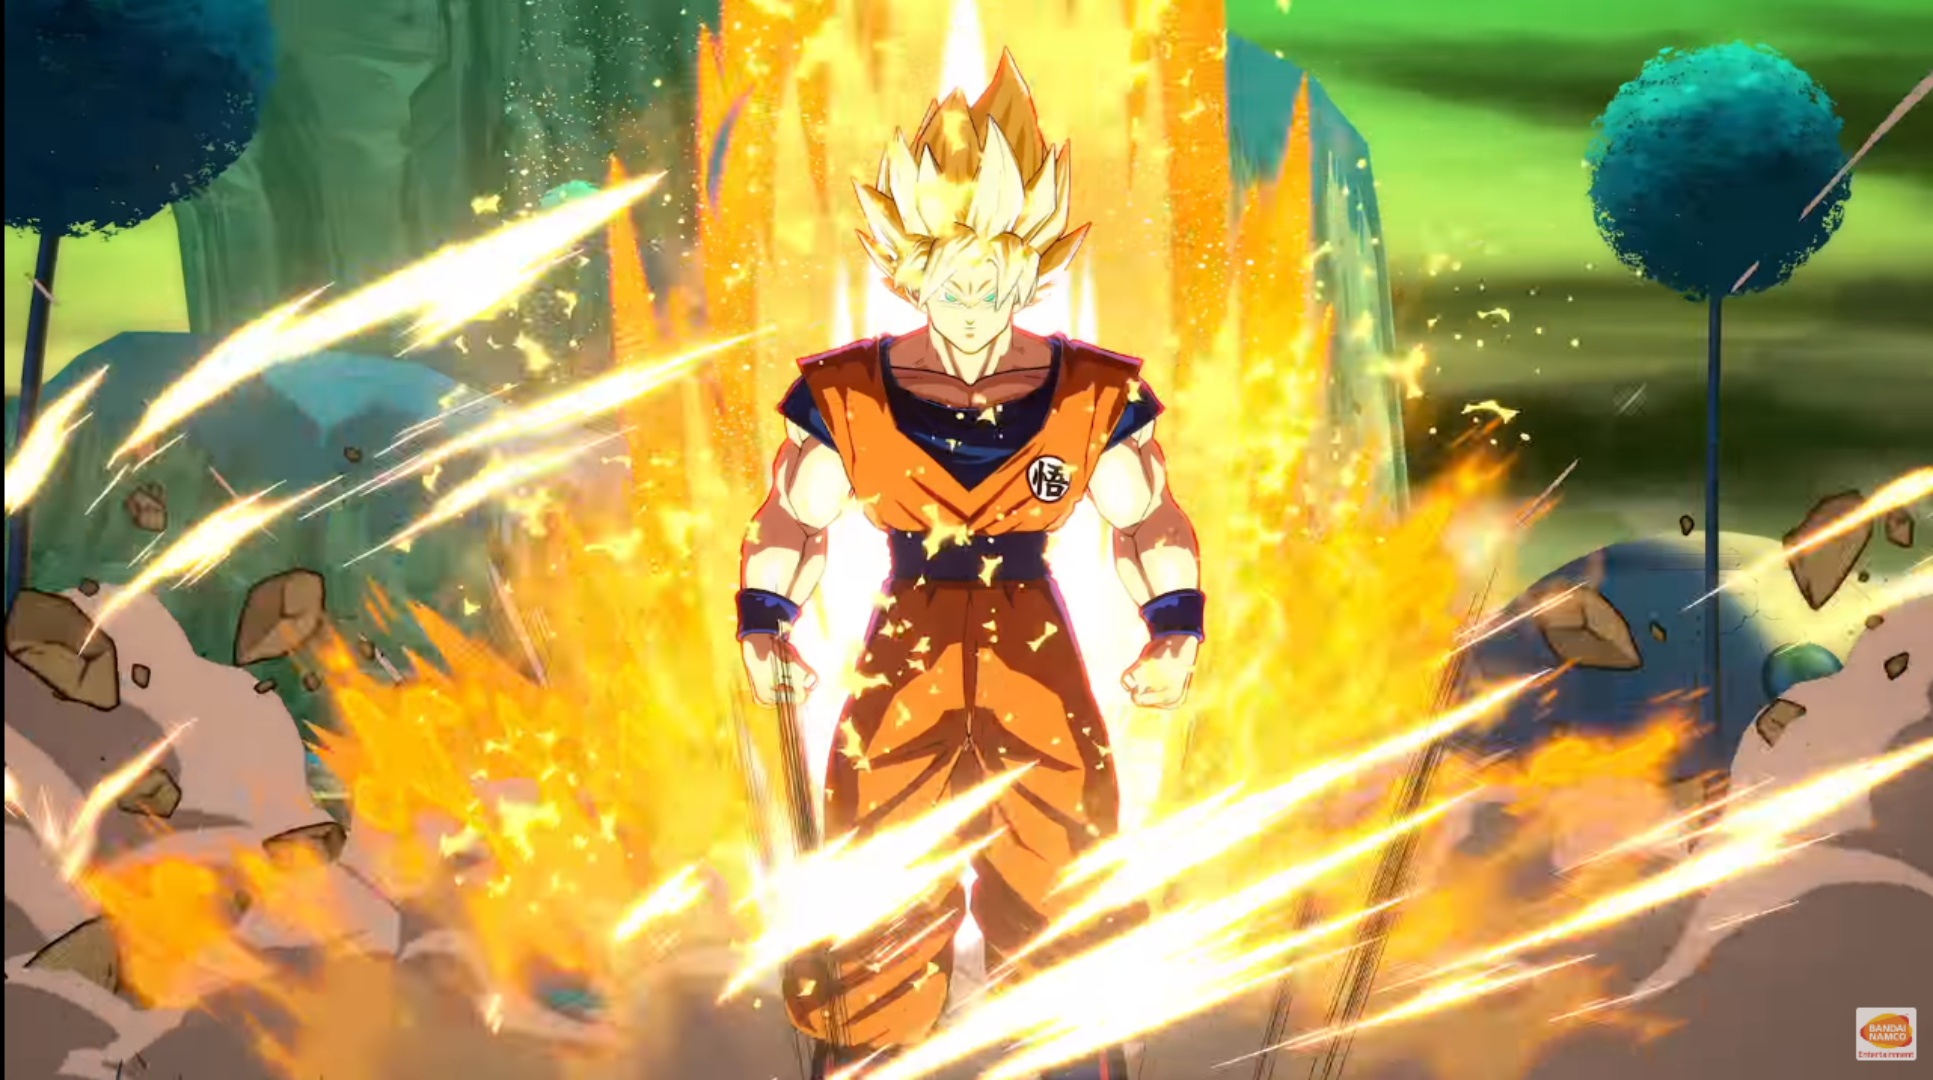 Dragon Ball FighterZ Featured